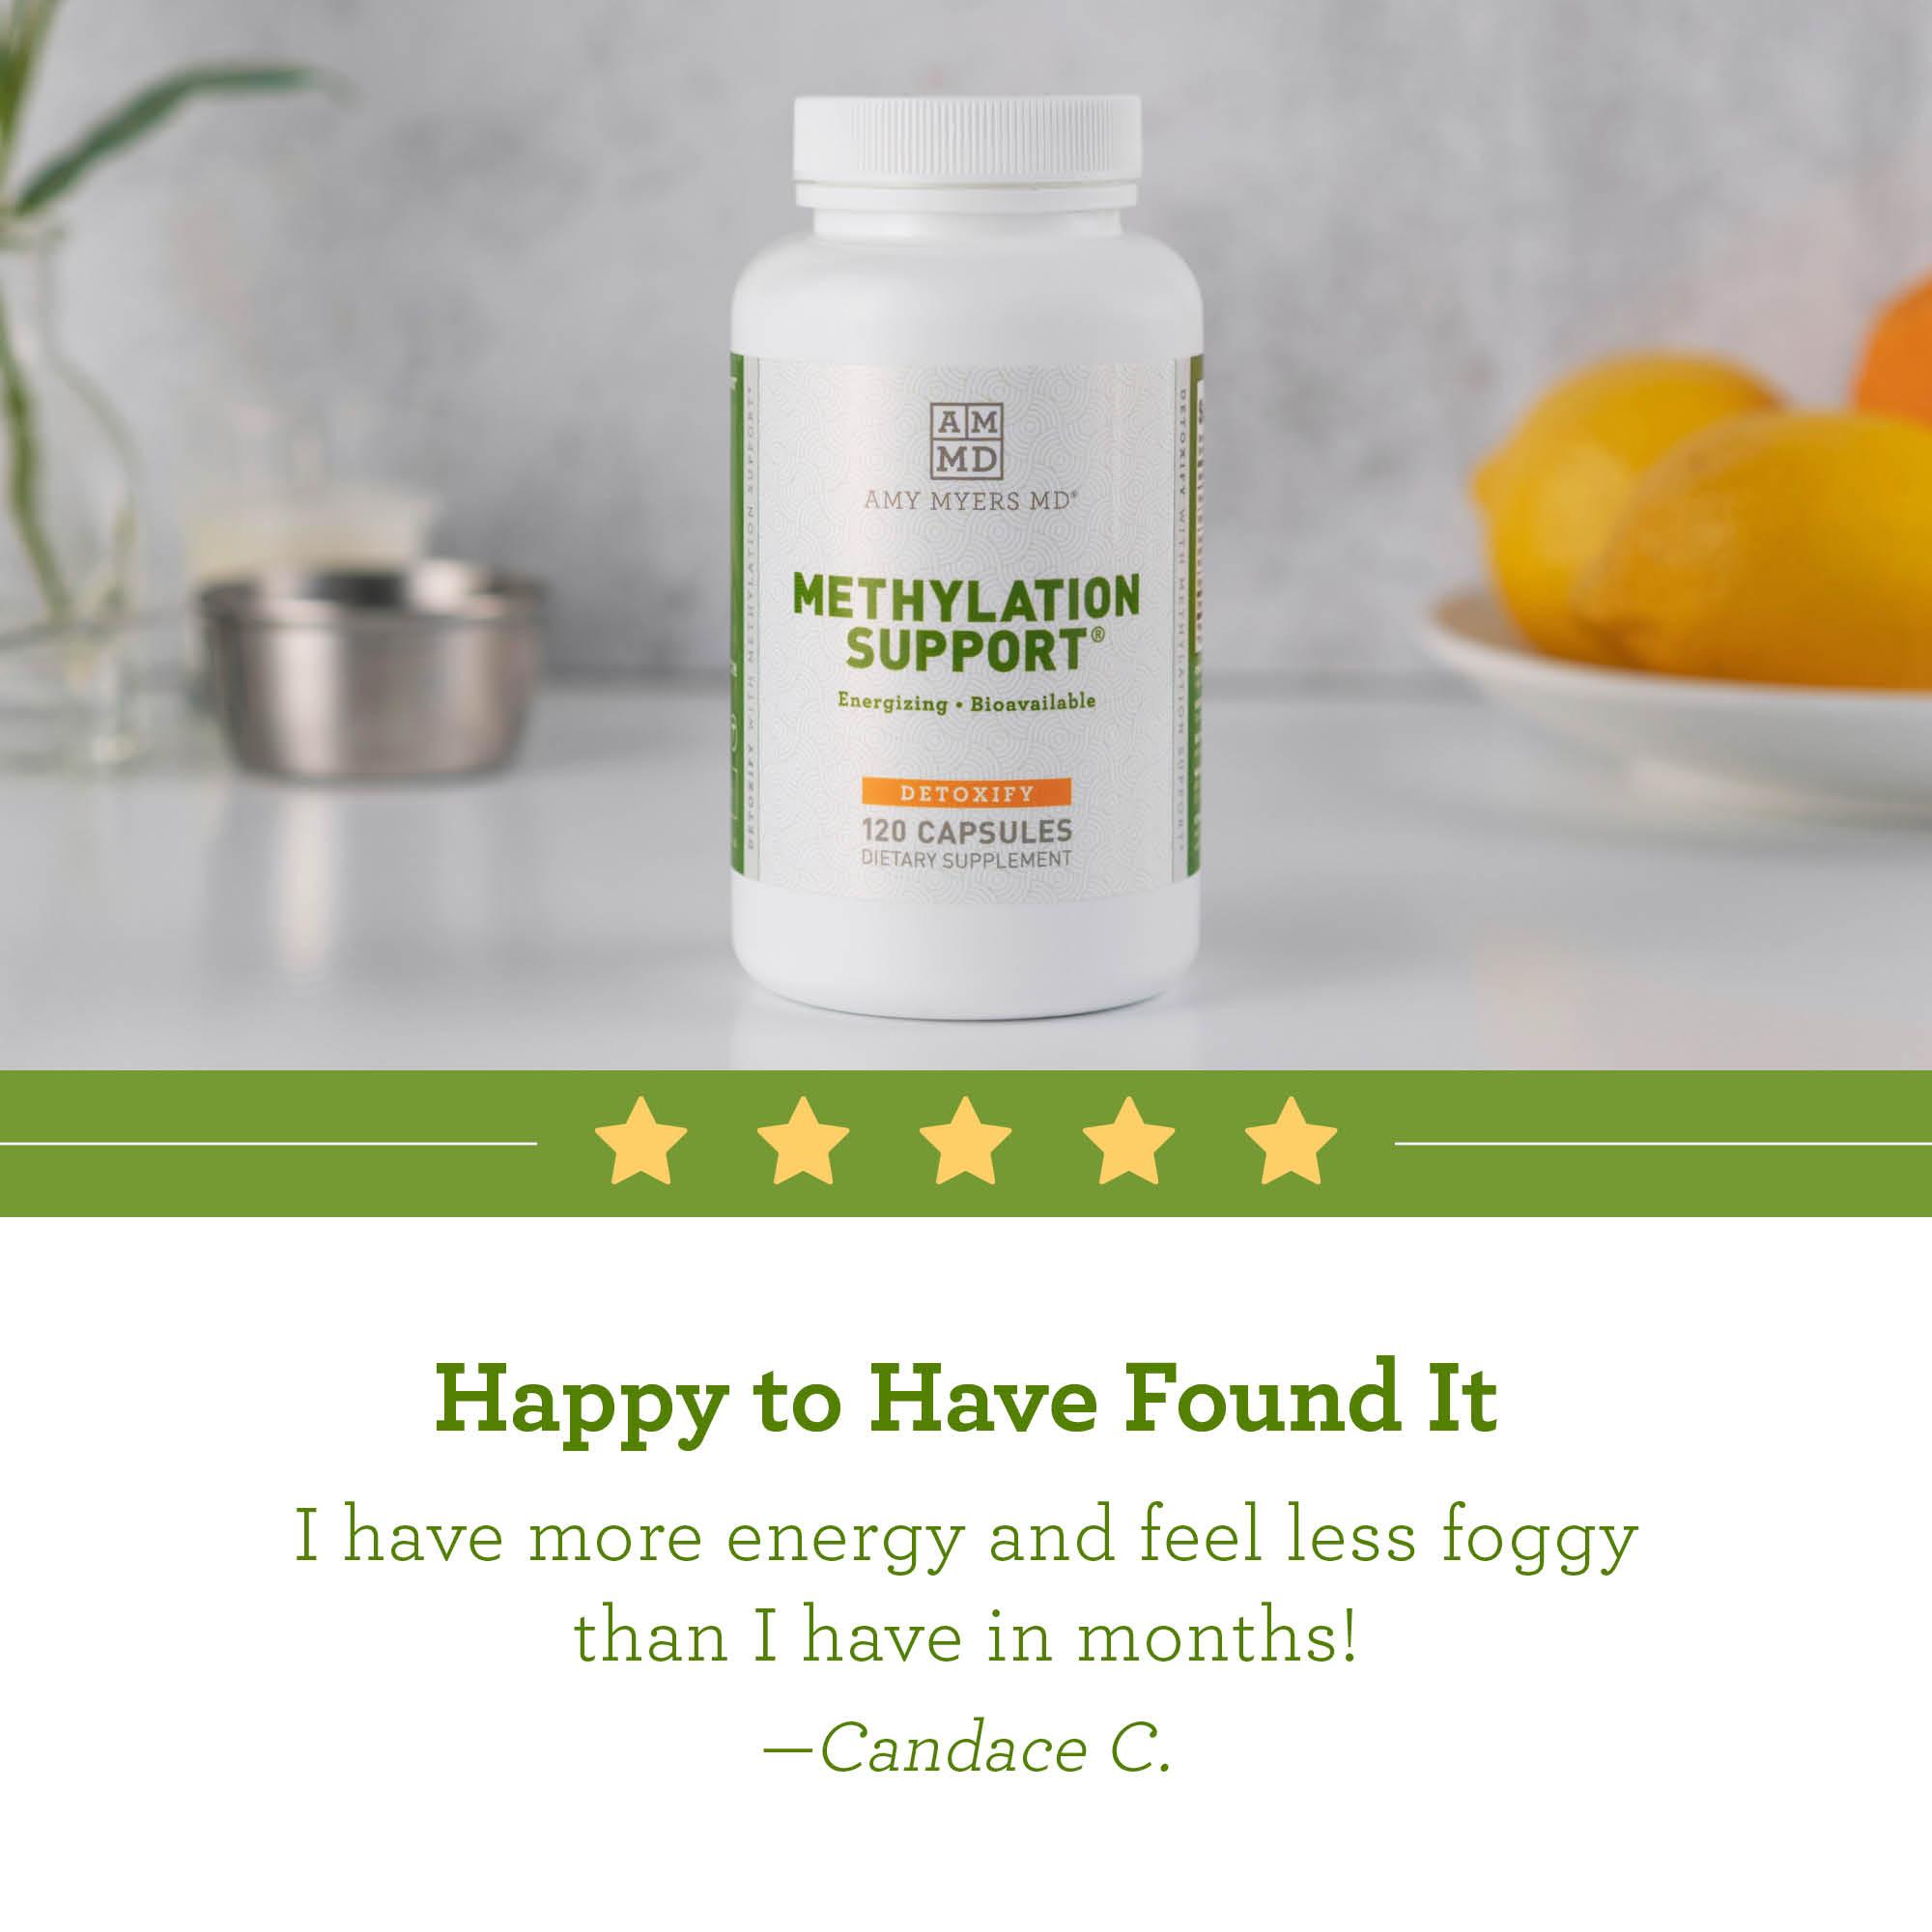 A bottle of Methylation Support supplement capsules on a tabletop with reviews - Reviews Image - Amy Myers MD®